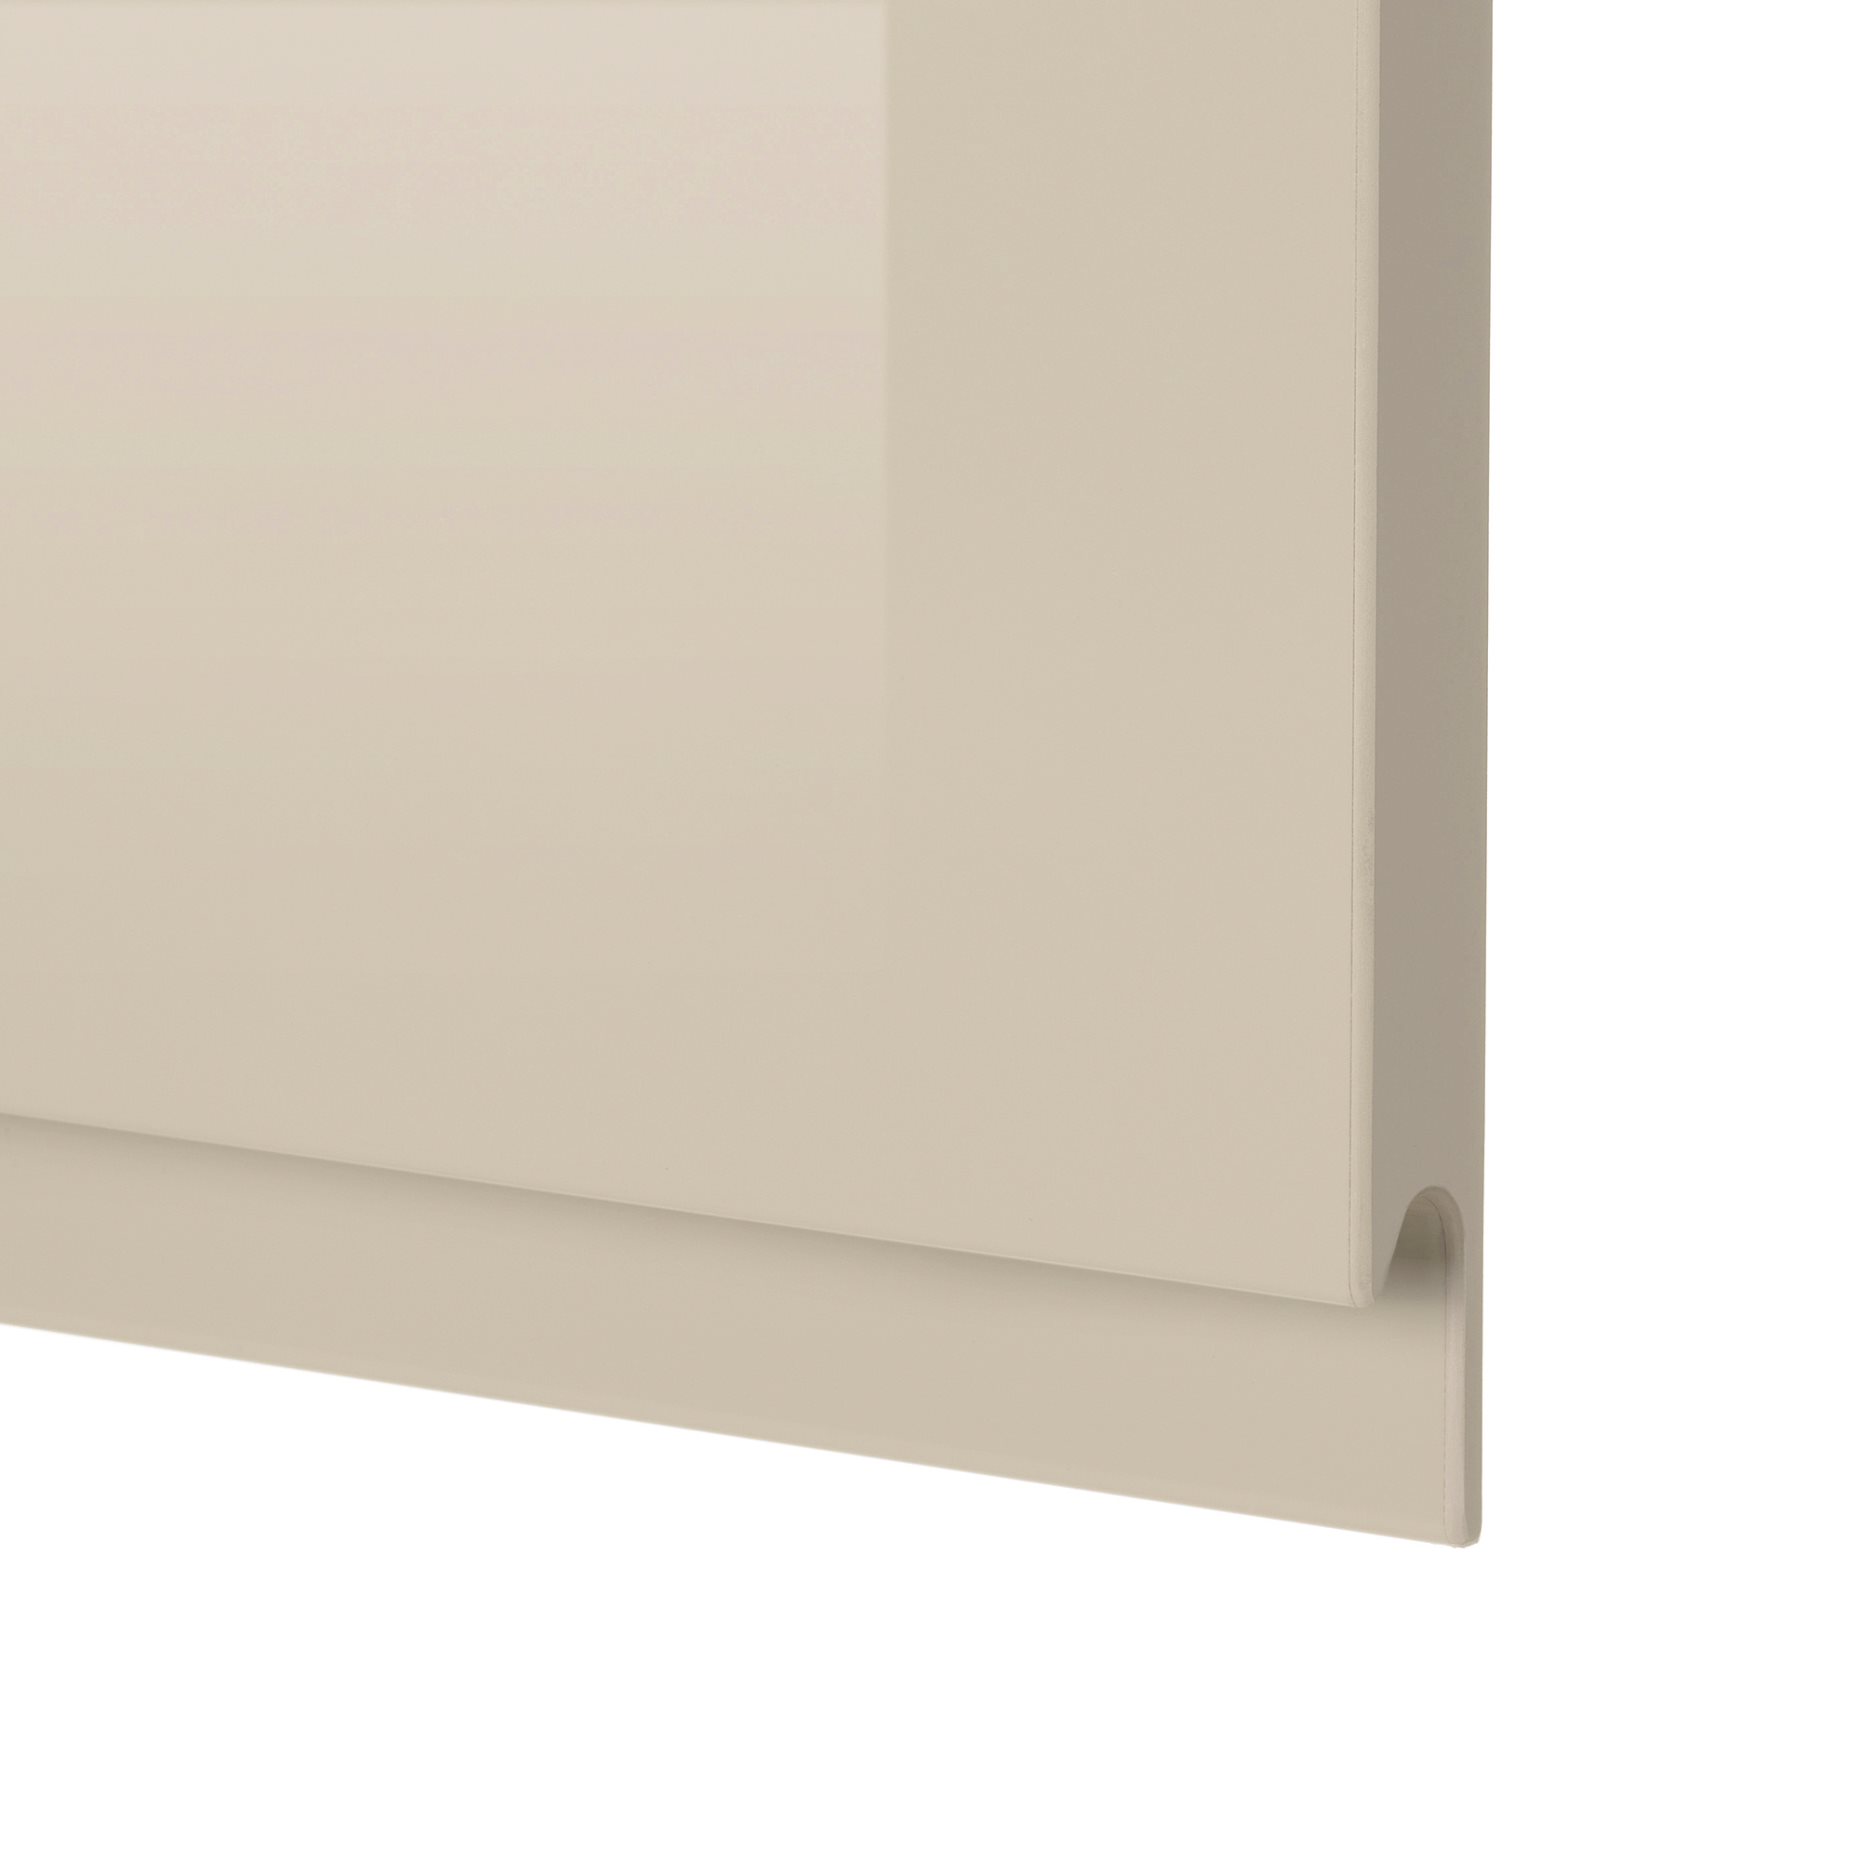 METOD, wall cabinet with shelves, 40x100 cm, 994.550.15